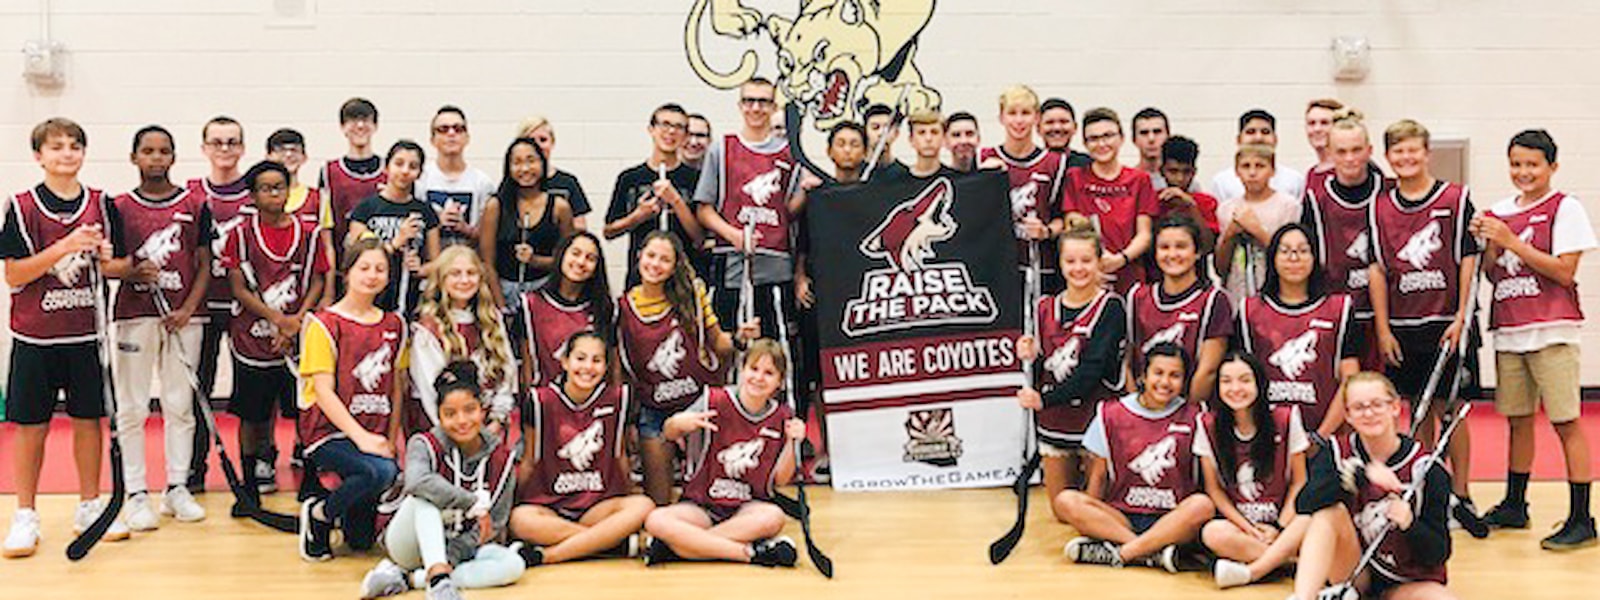 Students in Arizona Coyotes gear pose for a photography.